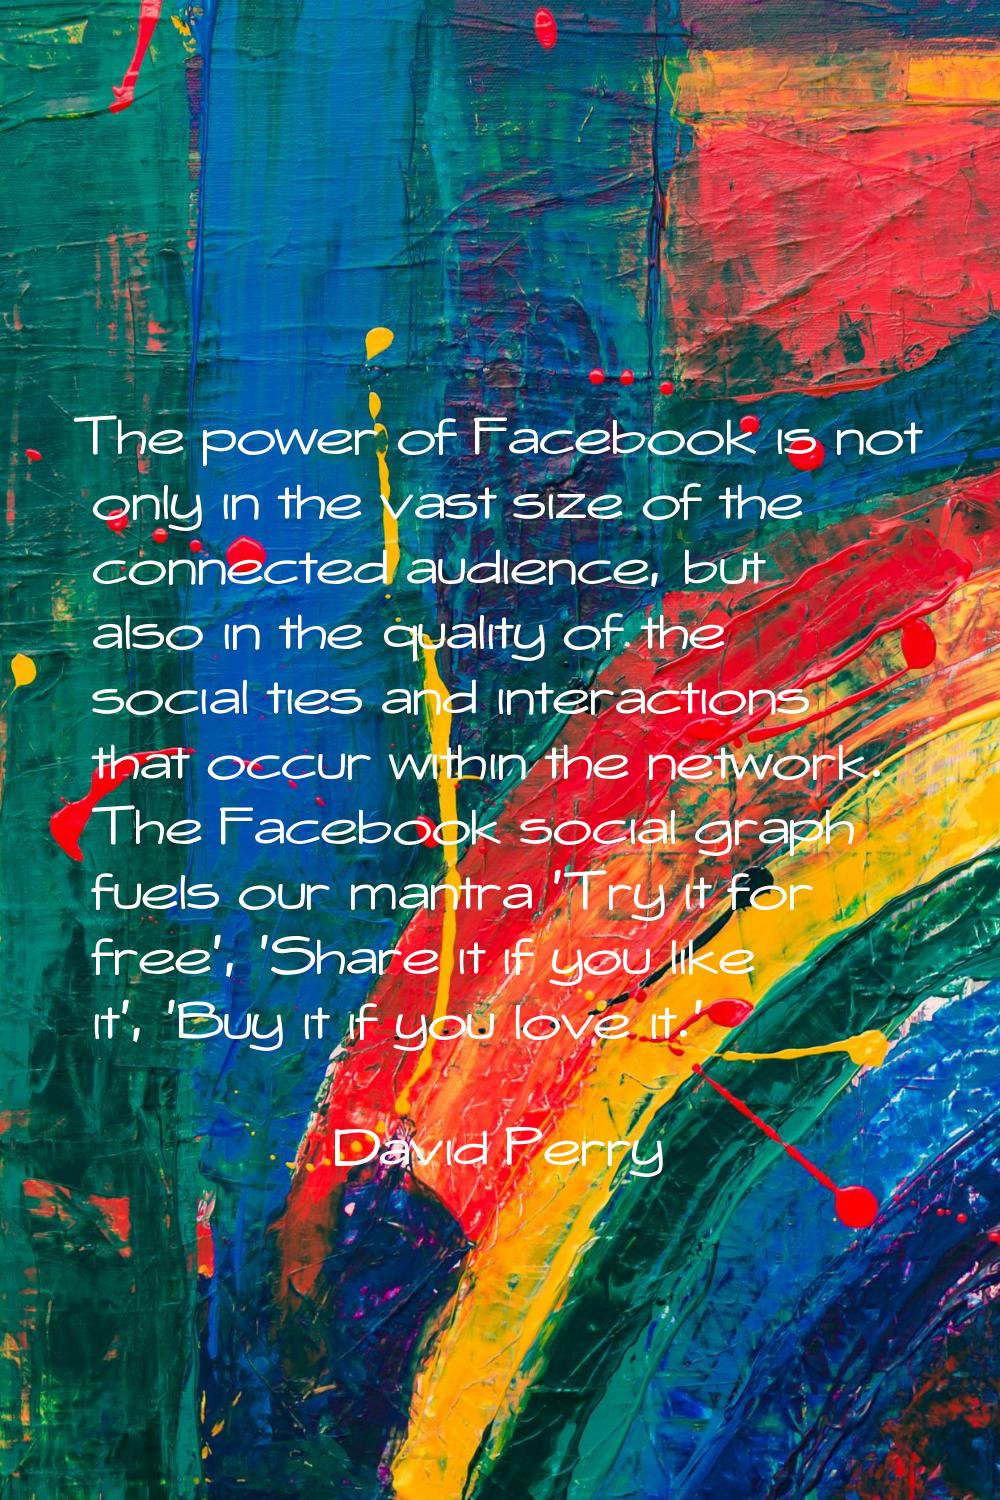 The power of Facebook is not only in the vast size of the connected audience, but also in the quali